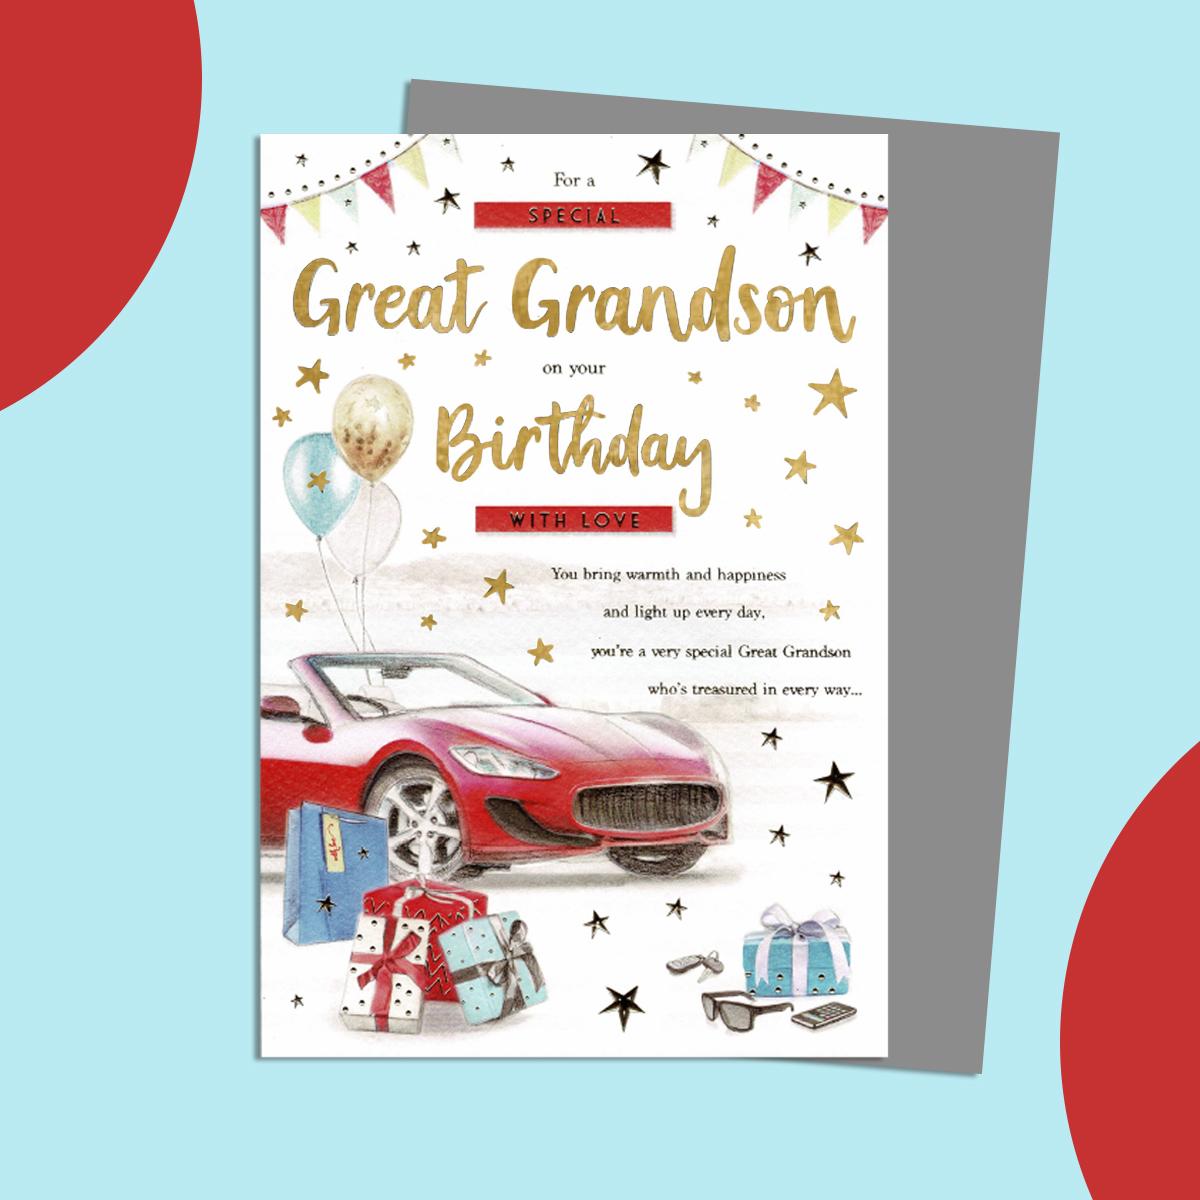 Great Grandson Birthday Card Featuring A Red Sports Car